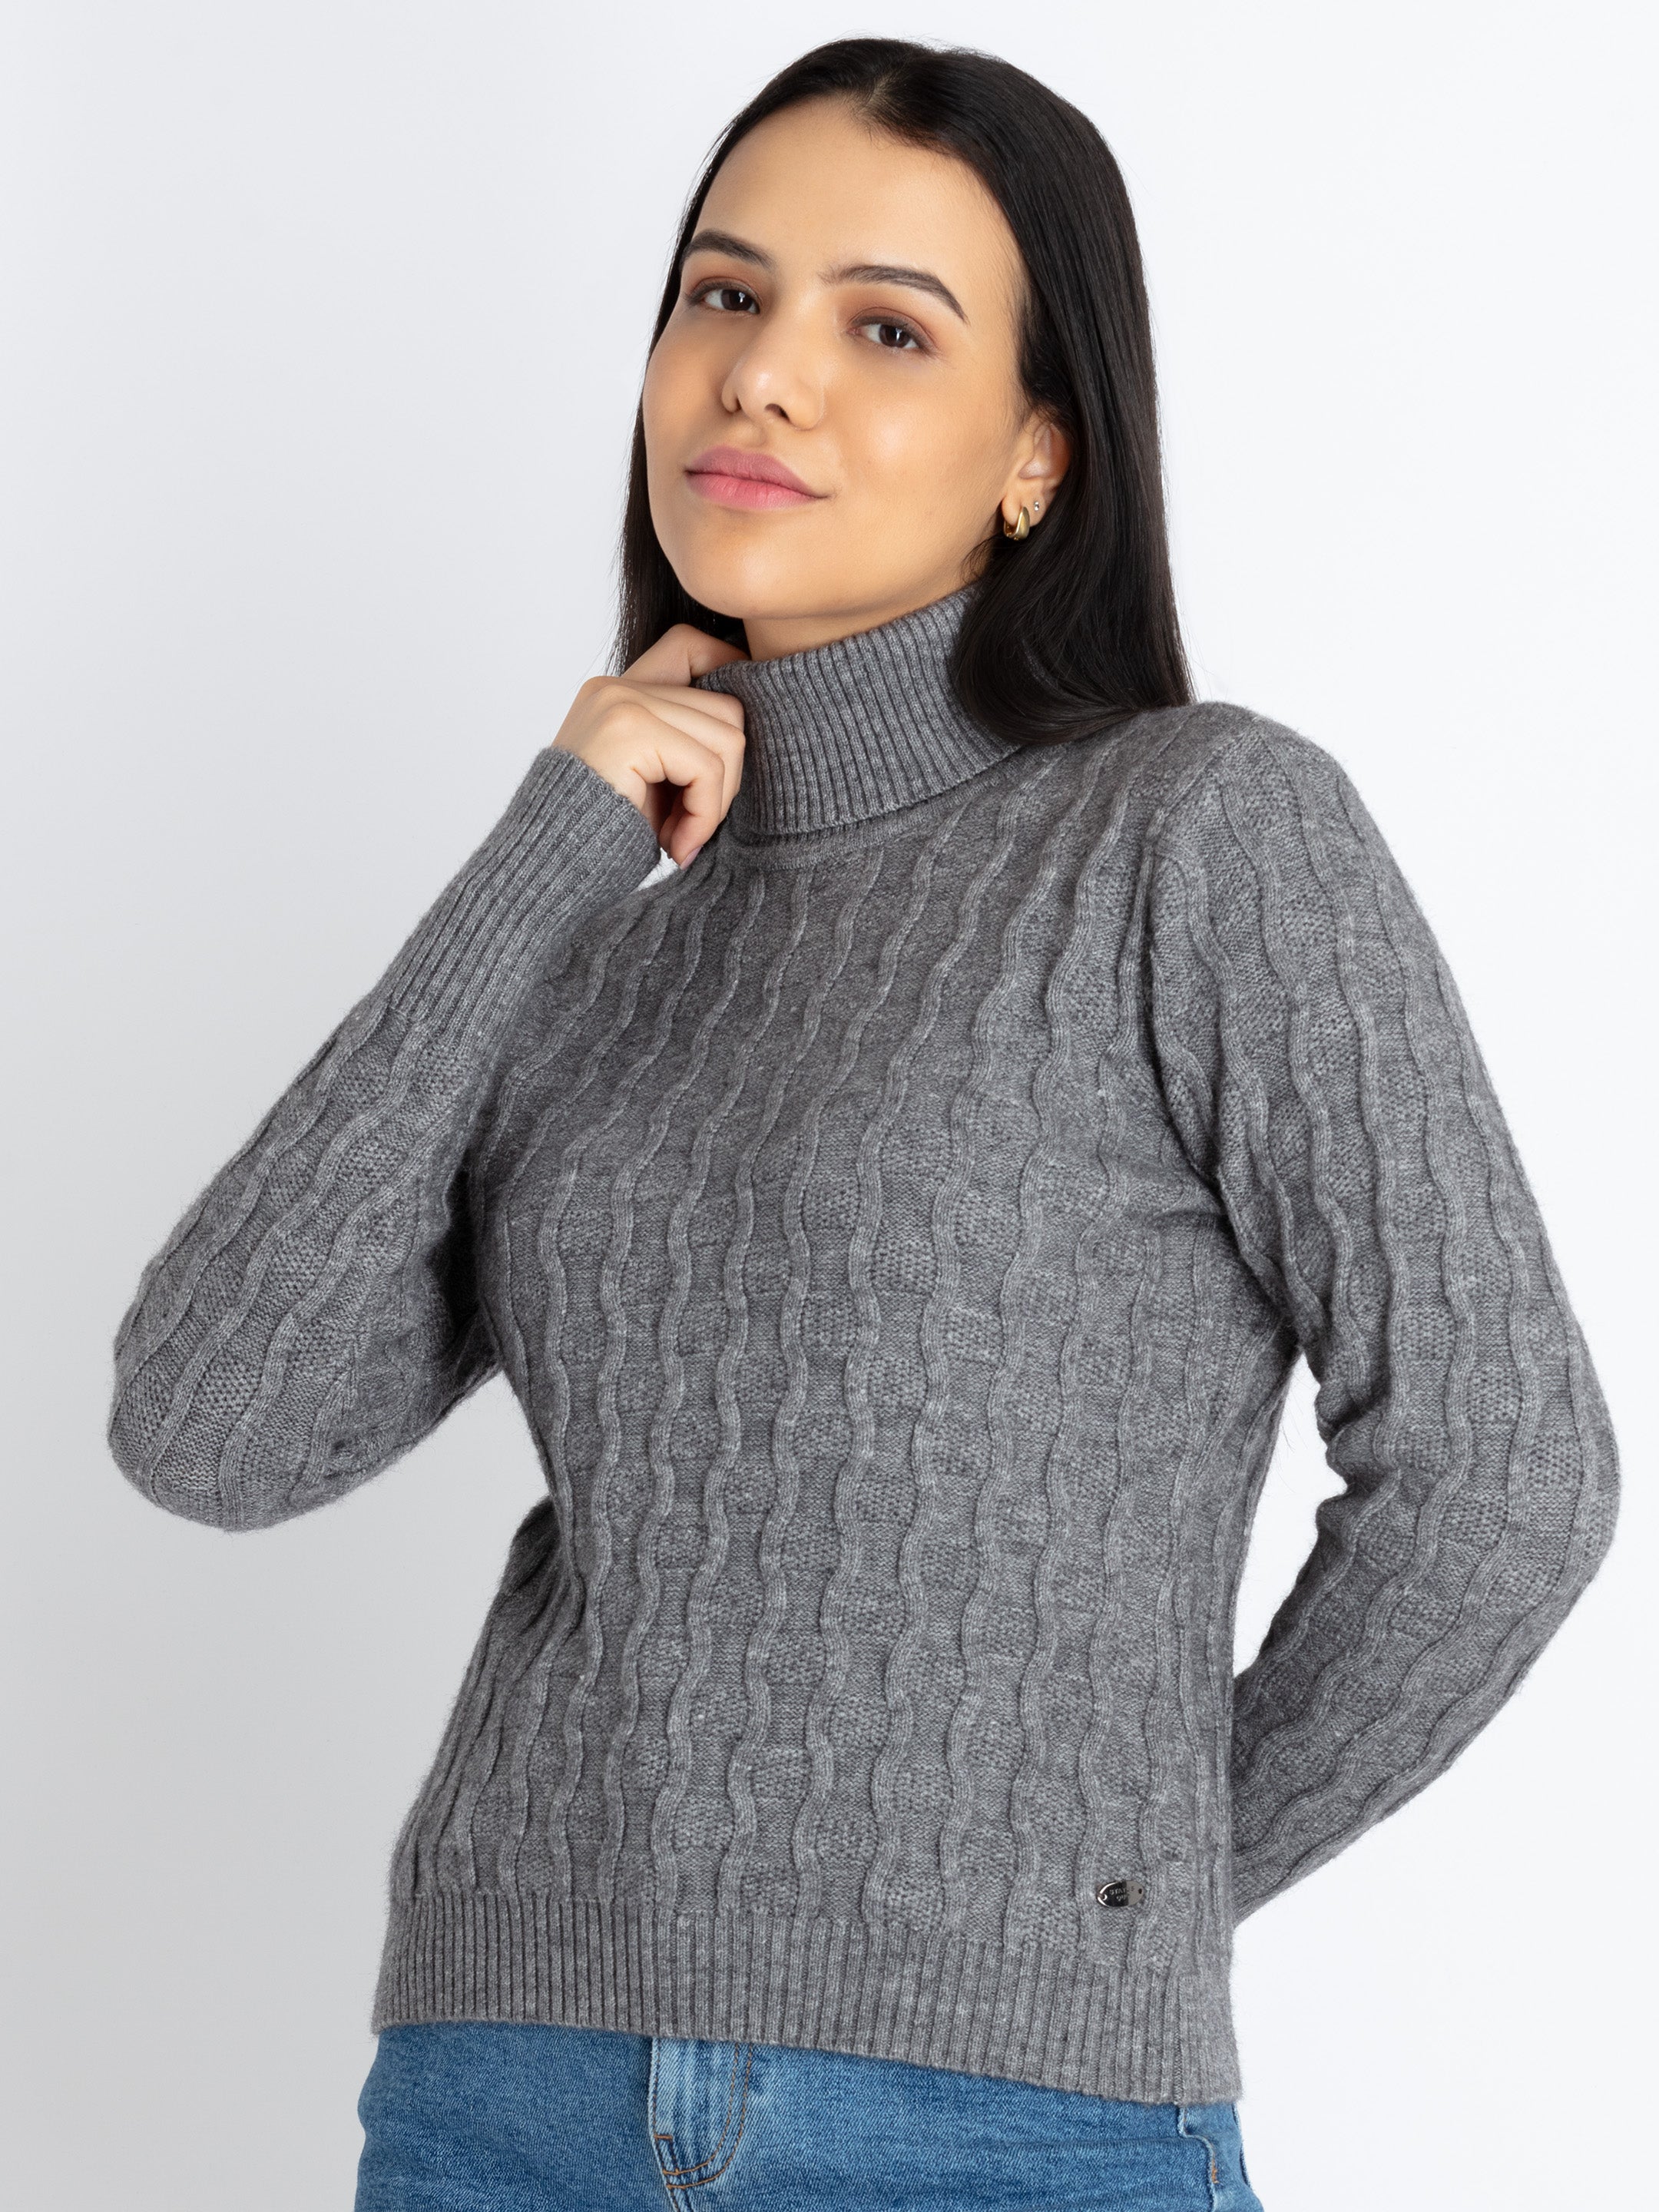 Womens Solid High Neck Sweater - M / GREY / SQW-FK-22989-GREY